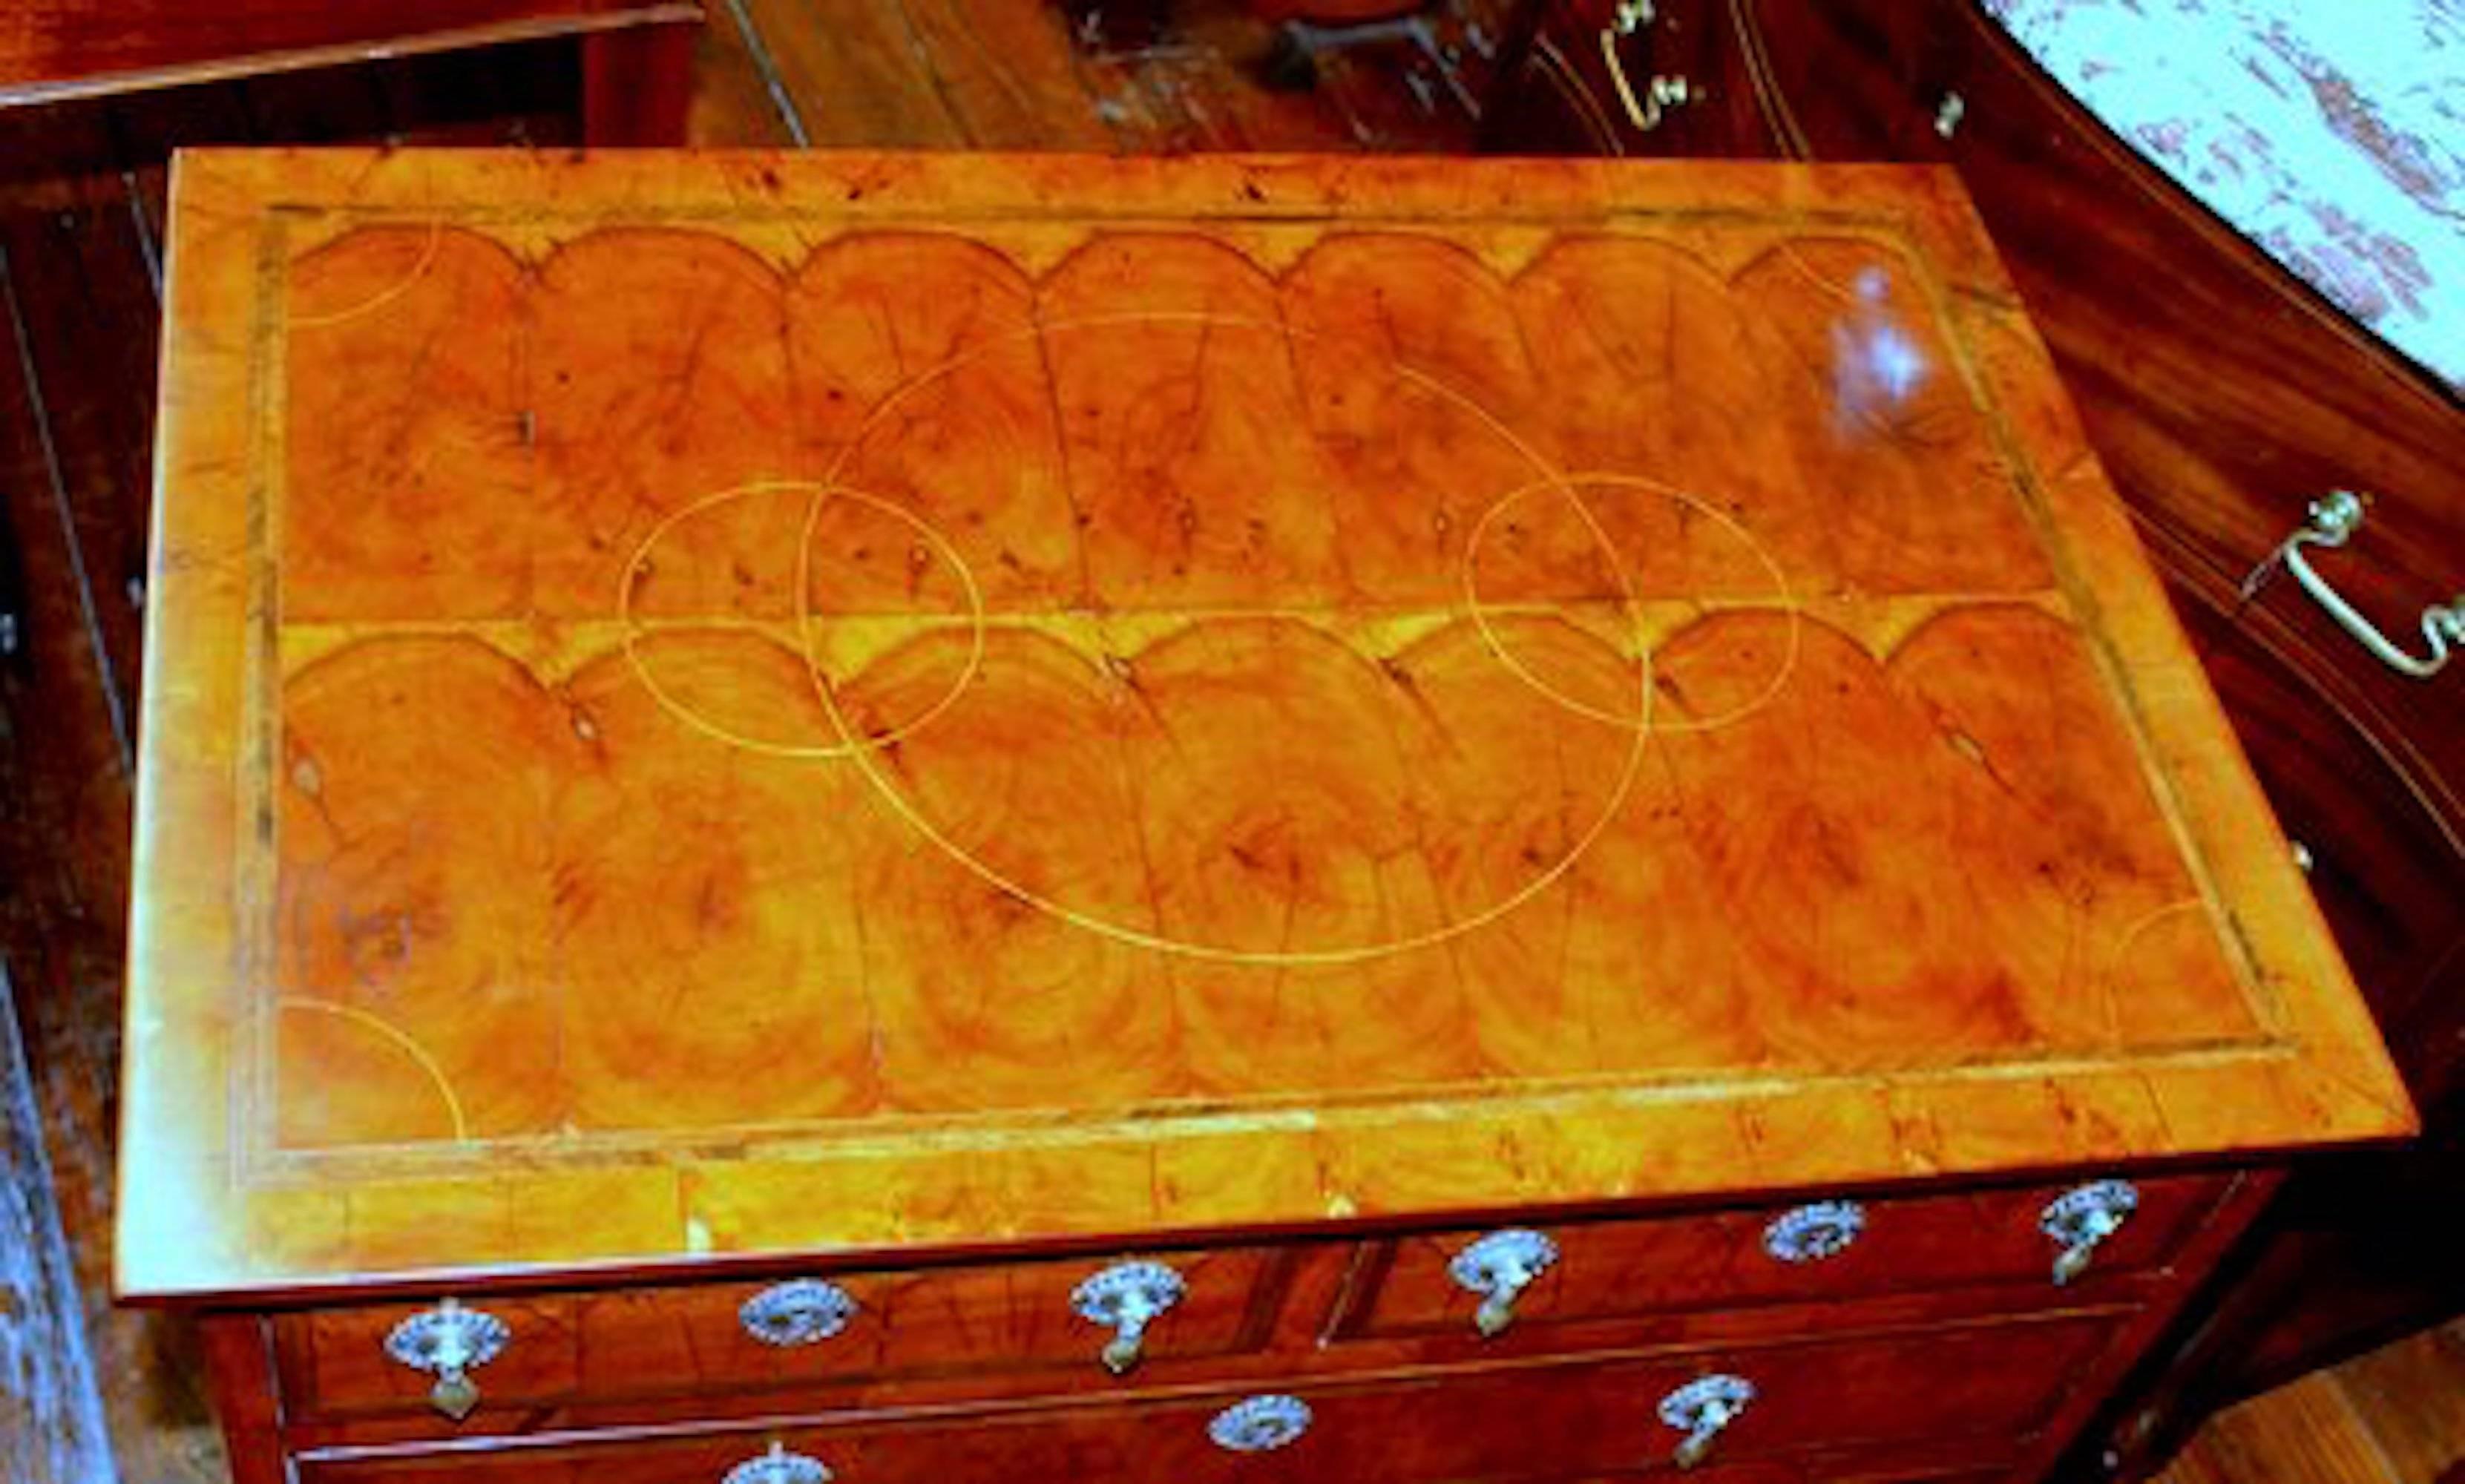 Pair of superb quality antique English inlaid yew-wood oyster veneer Queen Anne Revival Bachelor's chests

Please note handsome 